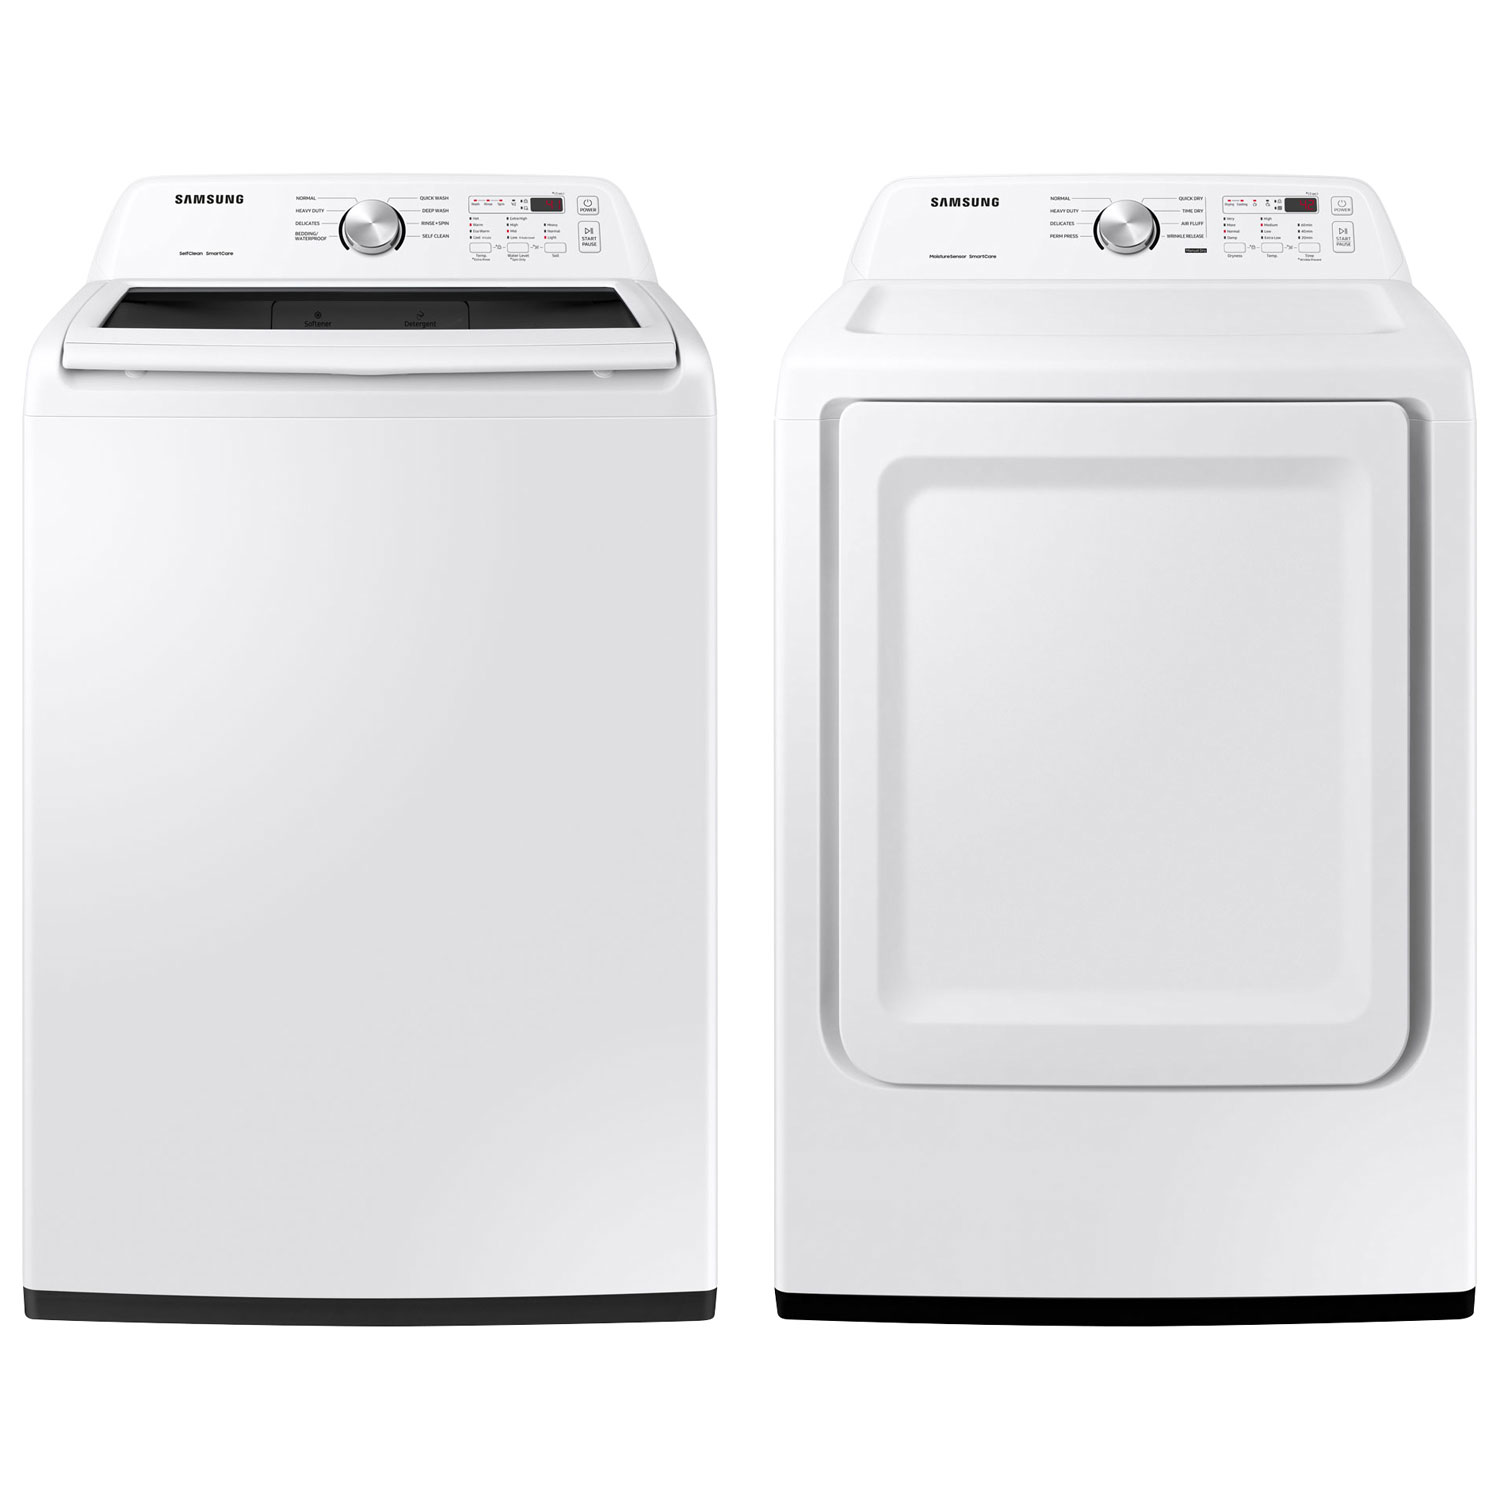 Samsung 5.2 Cu. Ft. High Efficiency Top Load Washer & 7.2 Cu. Ft. Electric Dryer - White